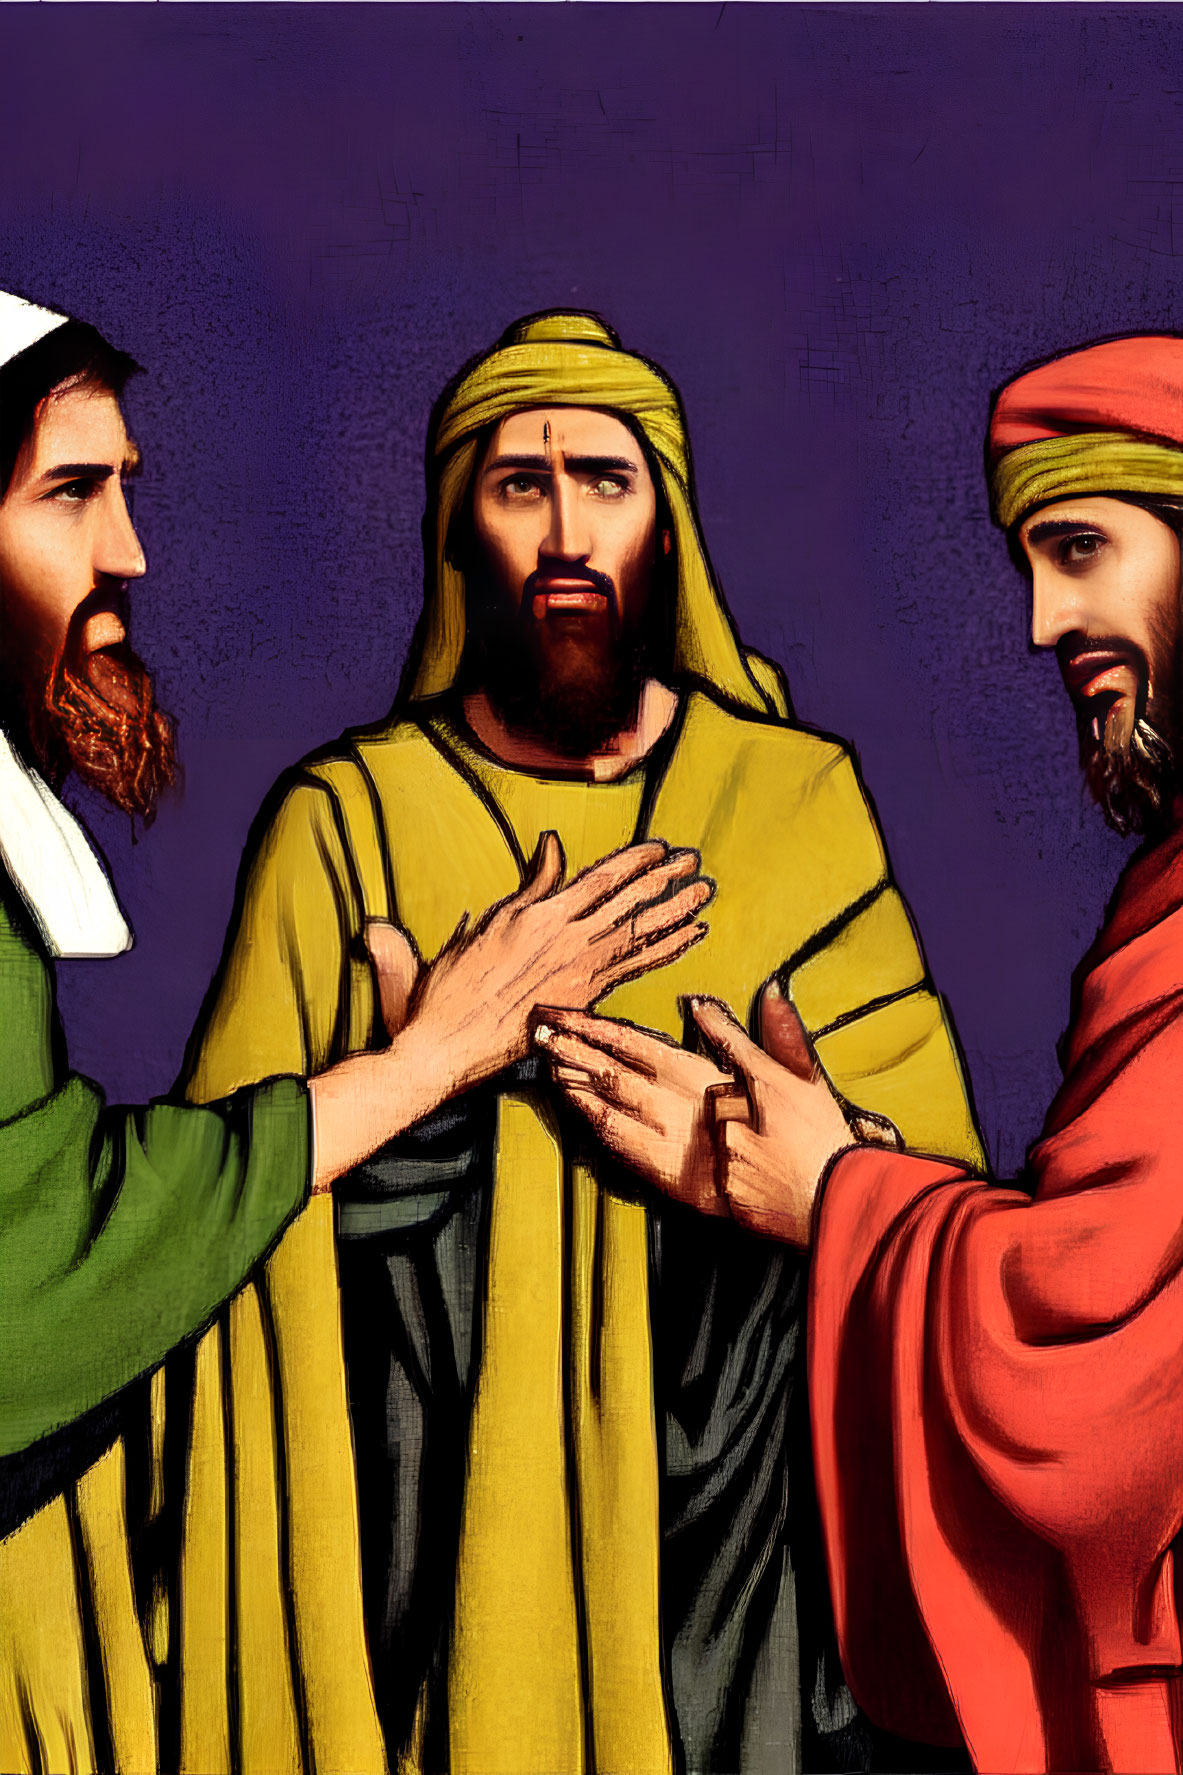 Three men in historical clothing having a serious conversation, one in a yellow robe.